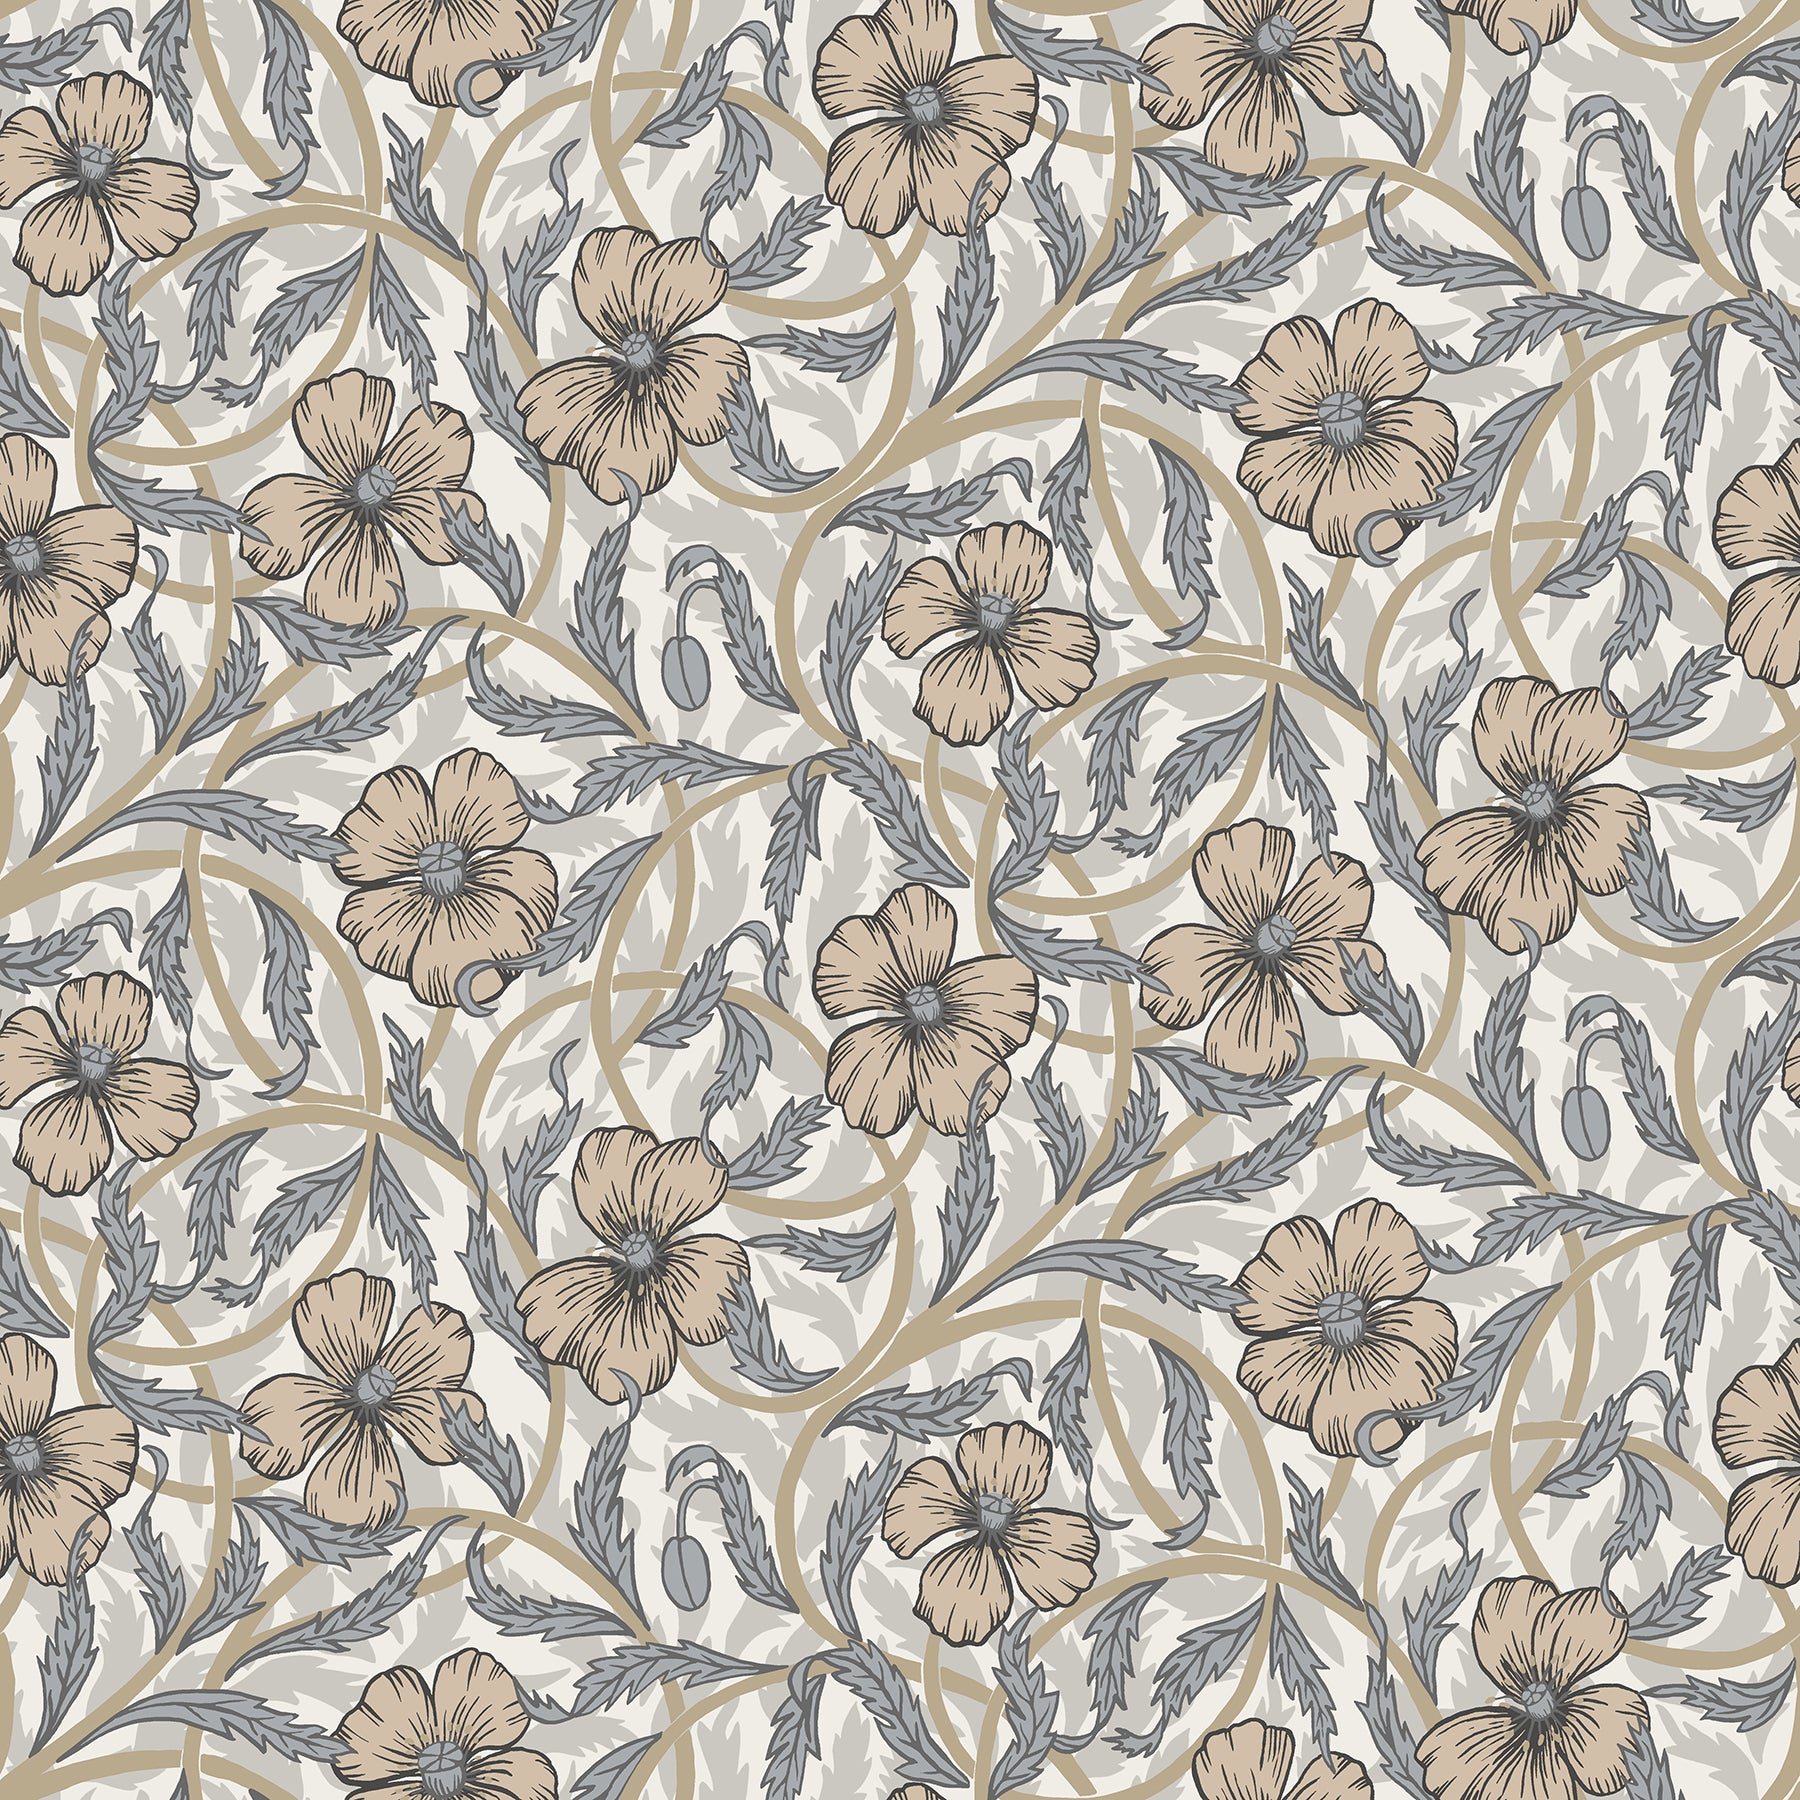 Looking for 2948-28025 Spring Imogen Neutral Floral Neutral A-Street Prints Wallpaper